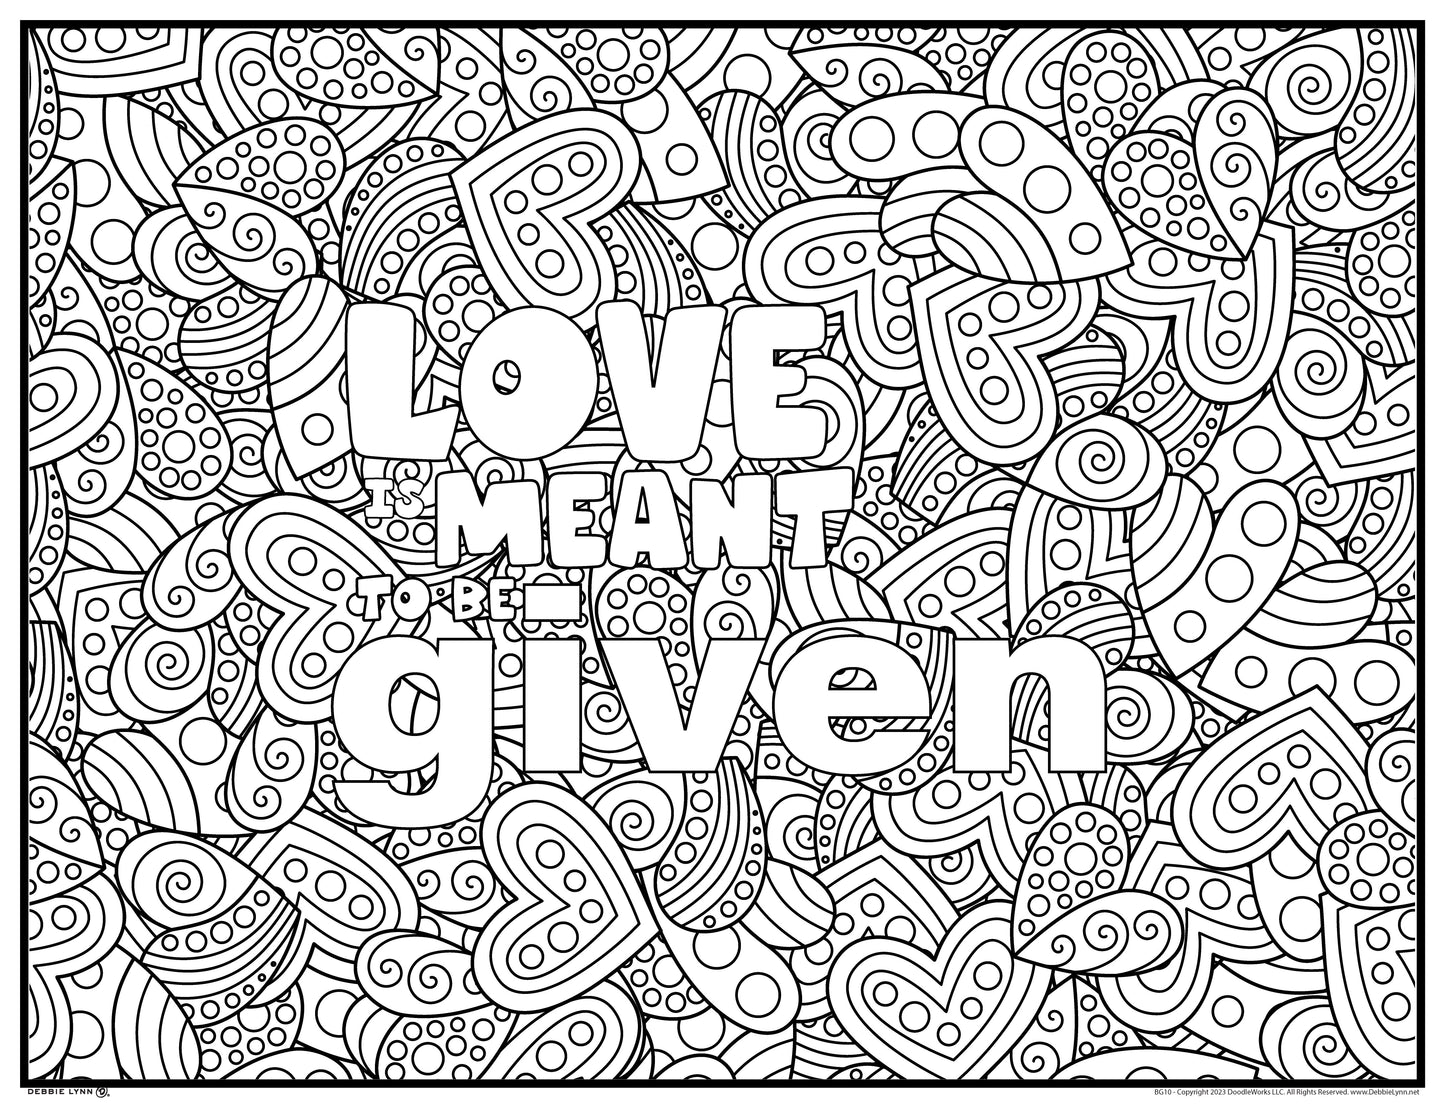 Love Is Meant to Be Given Giant Coloring Poster  46"x60"